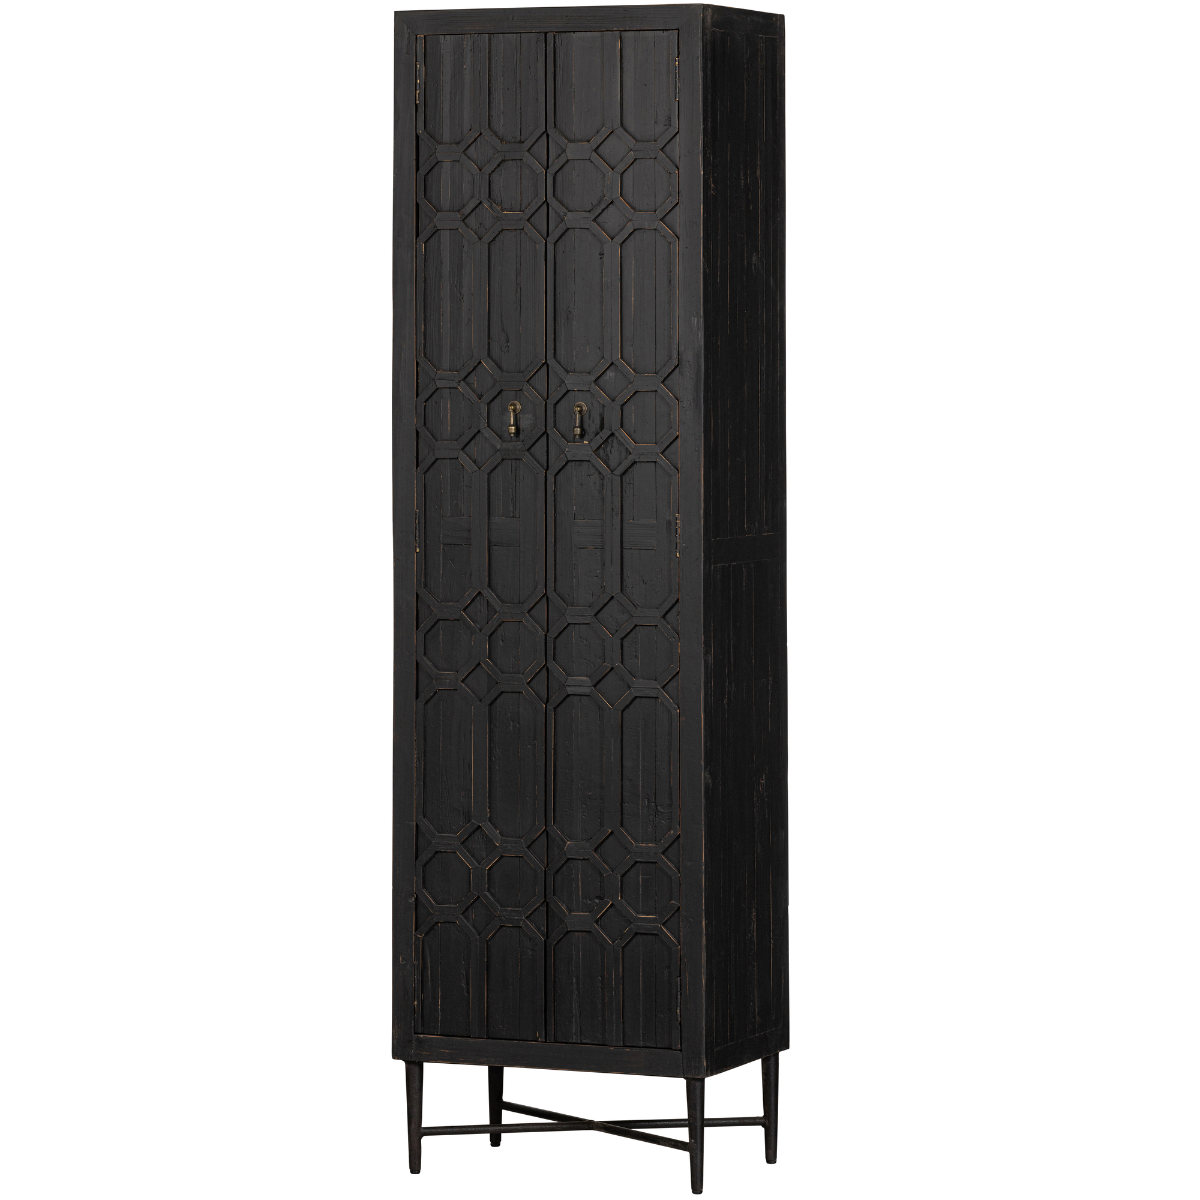 Bequest Black Wood High Cabinet